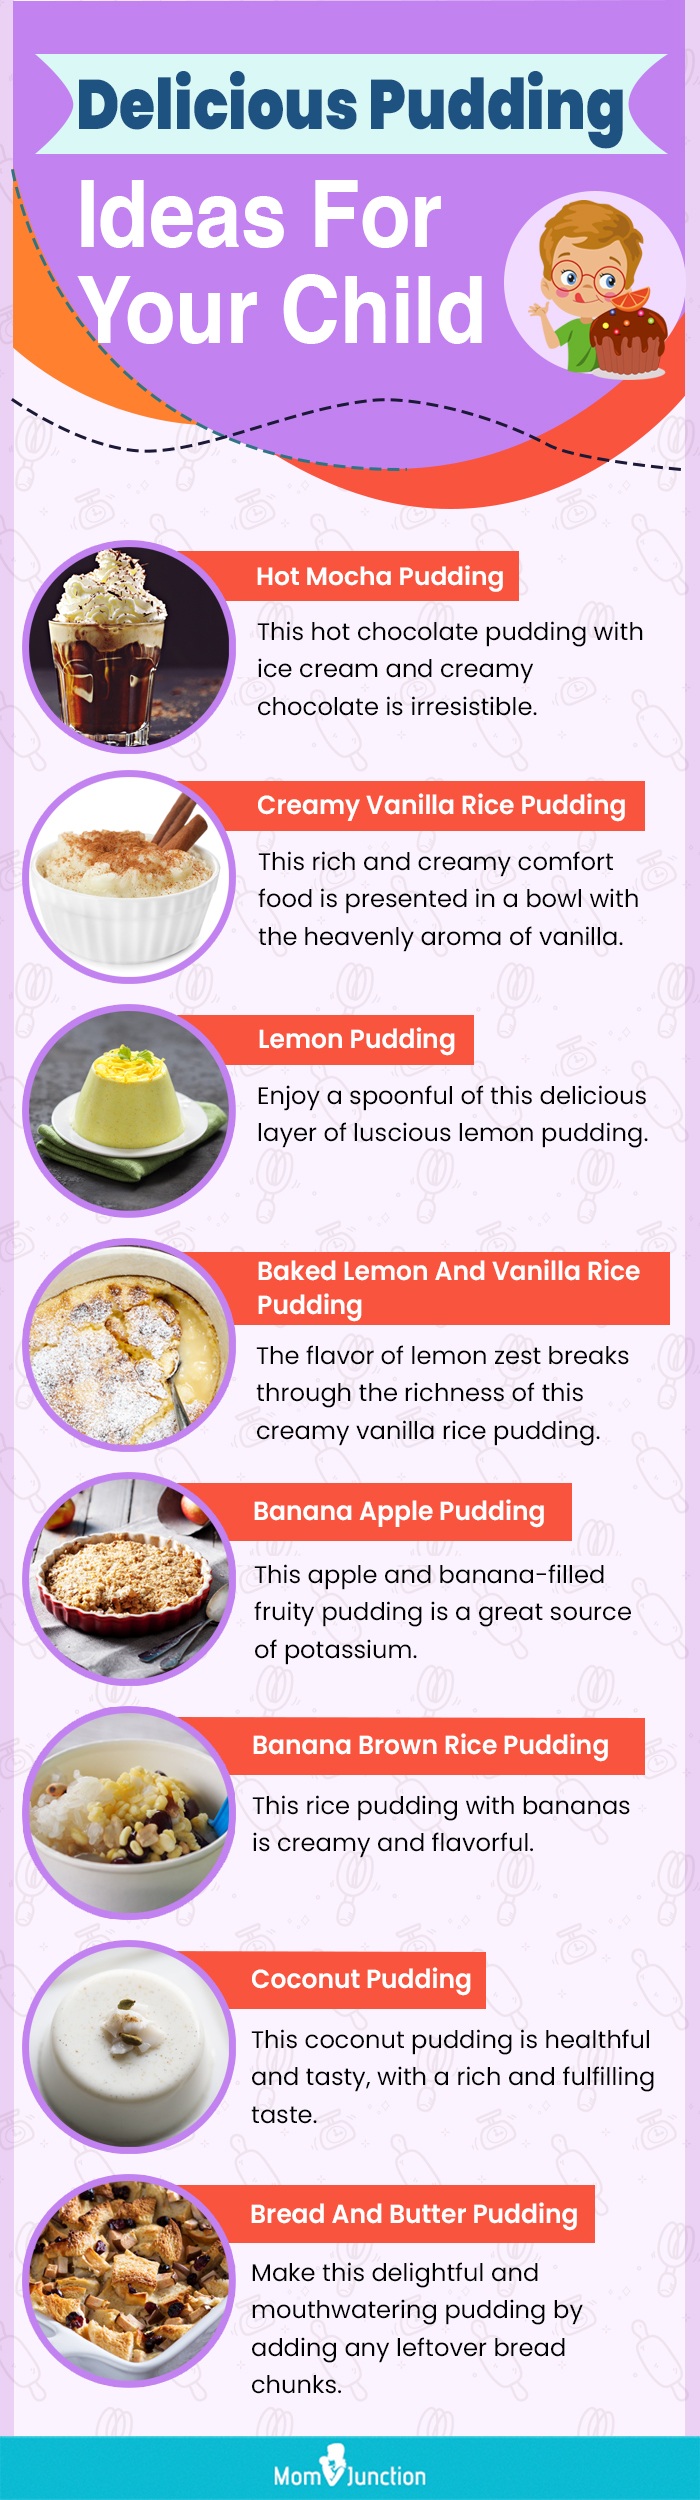 delicious pudding ideas for your child [infographic]